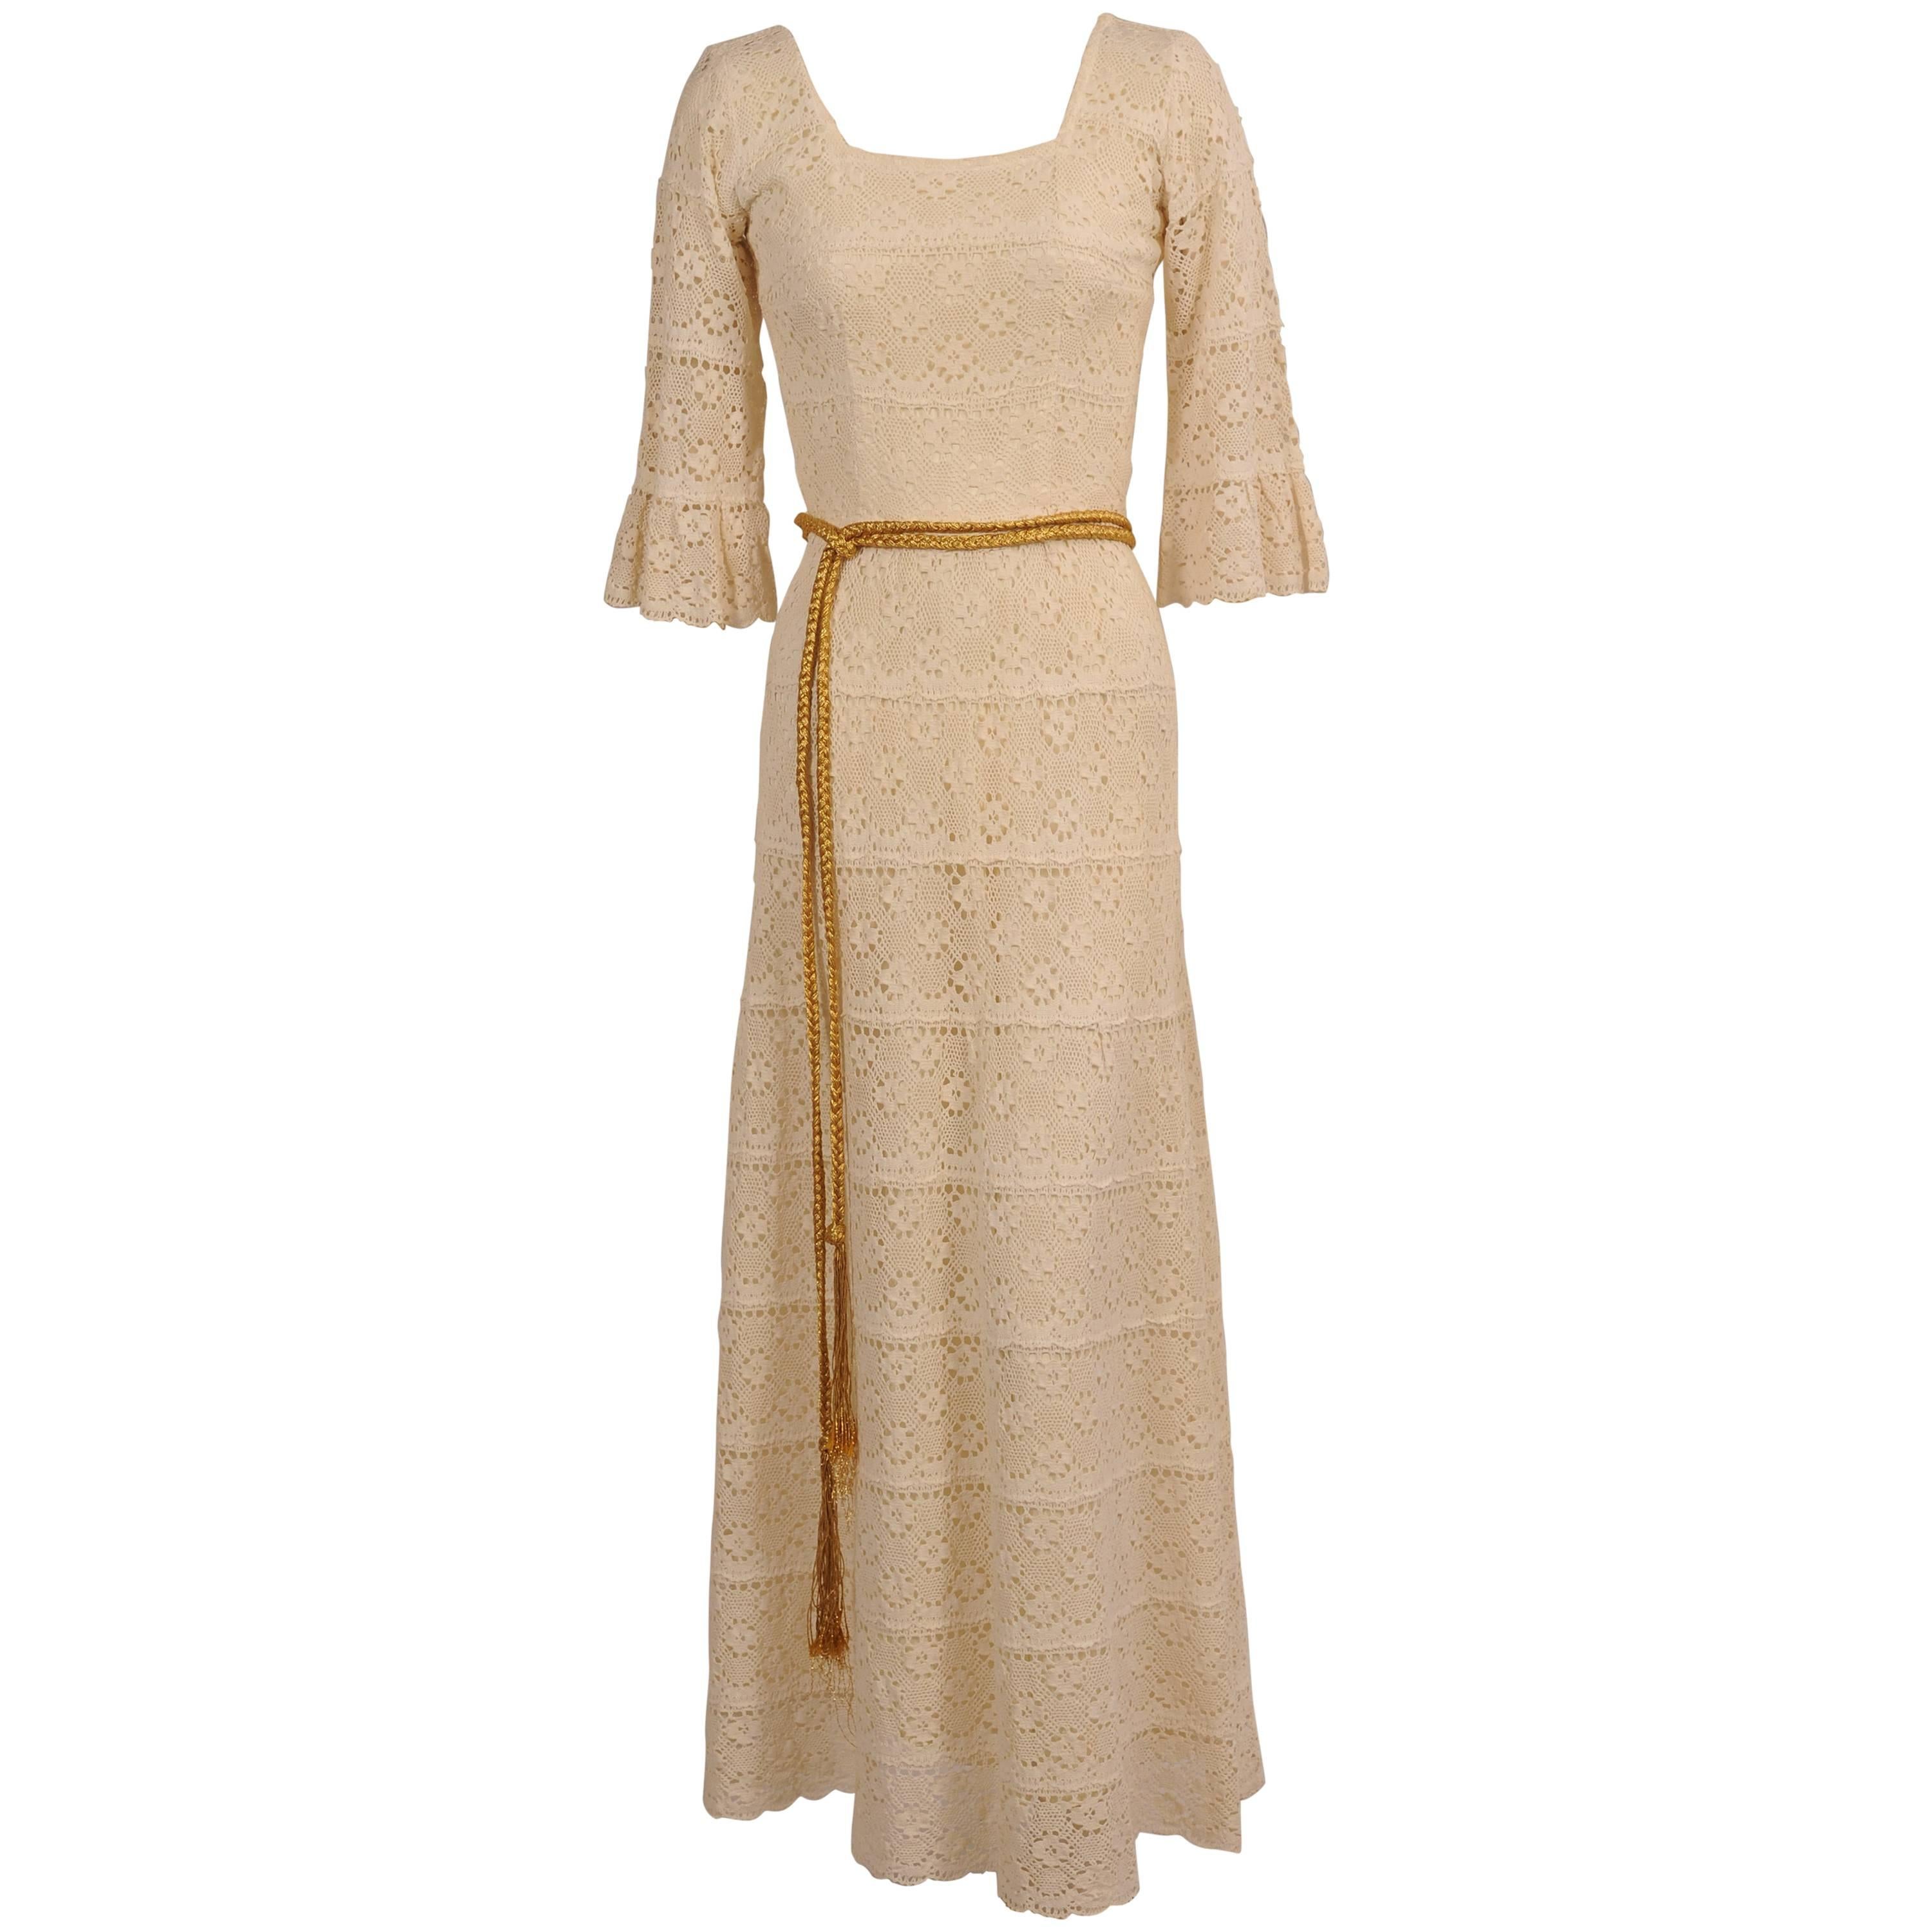 1970's Lace Maxi Dress with Braided Metallic Gold Belt For Sale